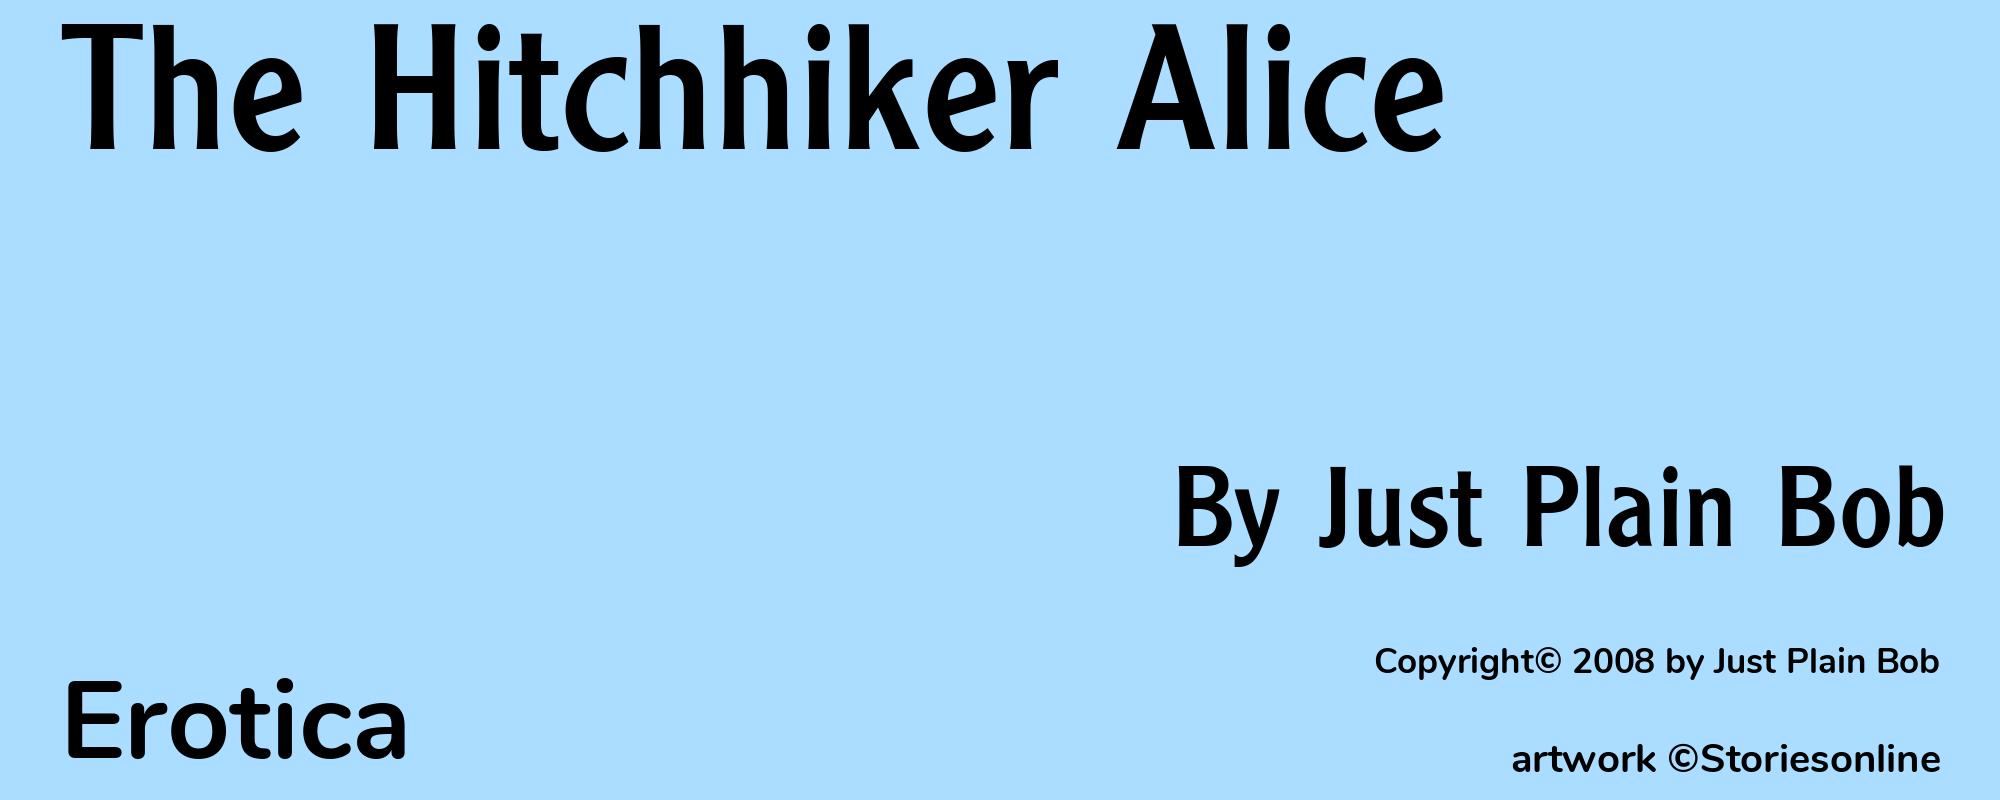 The Hitchhiker Alice - Cover